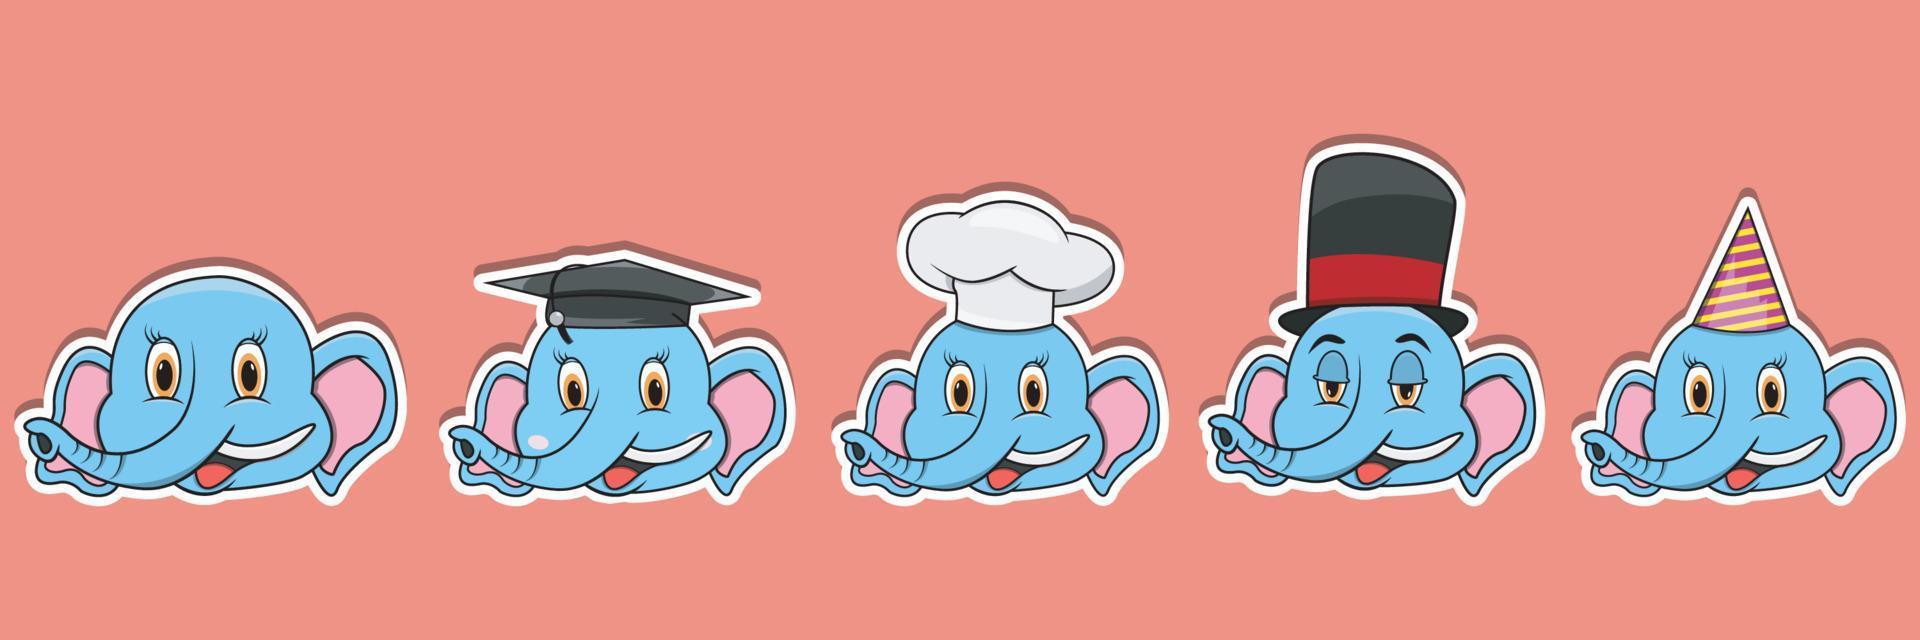 Head Elephant Animal Sticker Set. Graduation, Chef, Magician and Party hat. Perfect for stickers, logo, greeting card and invitation. vector